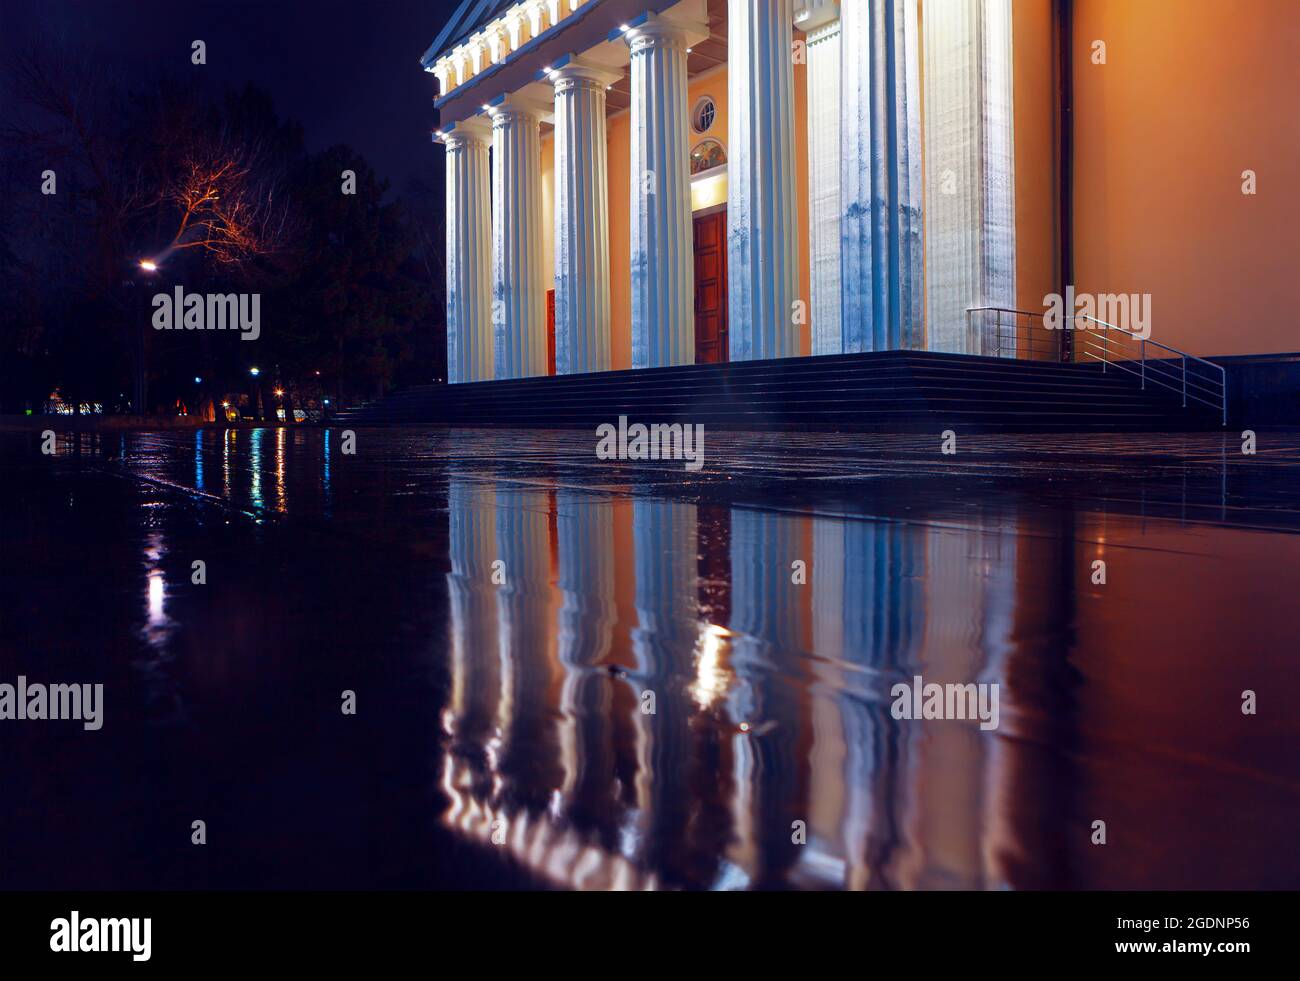 Doric columns of cathedral . Architecture of cathedral reflected in the wet pavement . Rainy night in the city Stock Photo